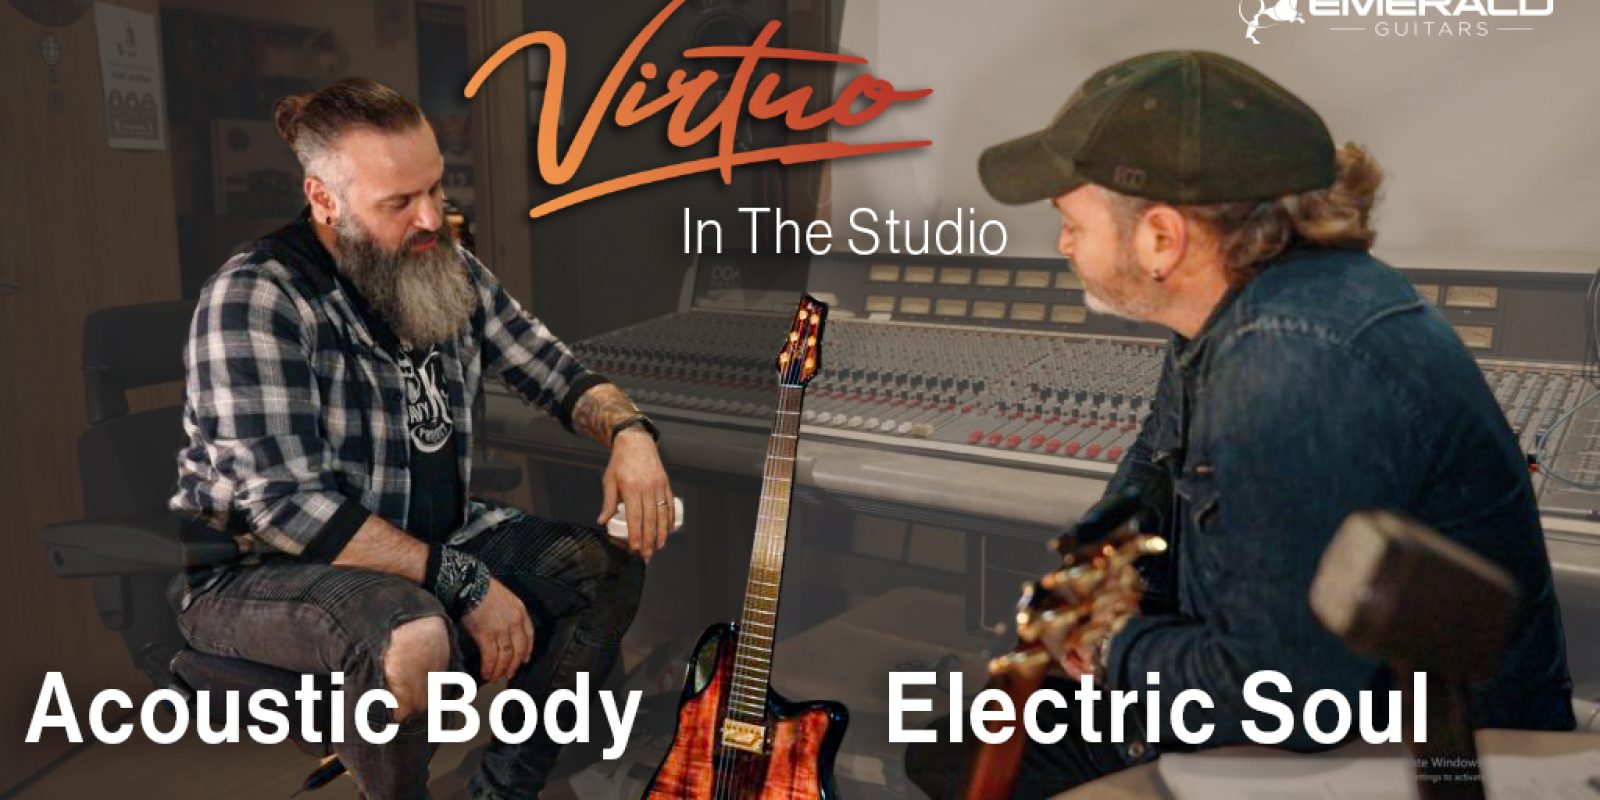 Musicians with the Virtuo guitar in the studio